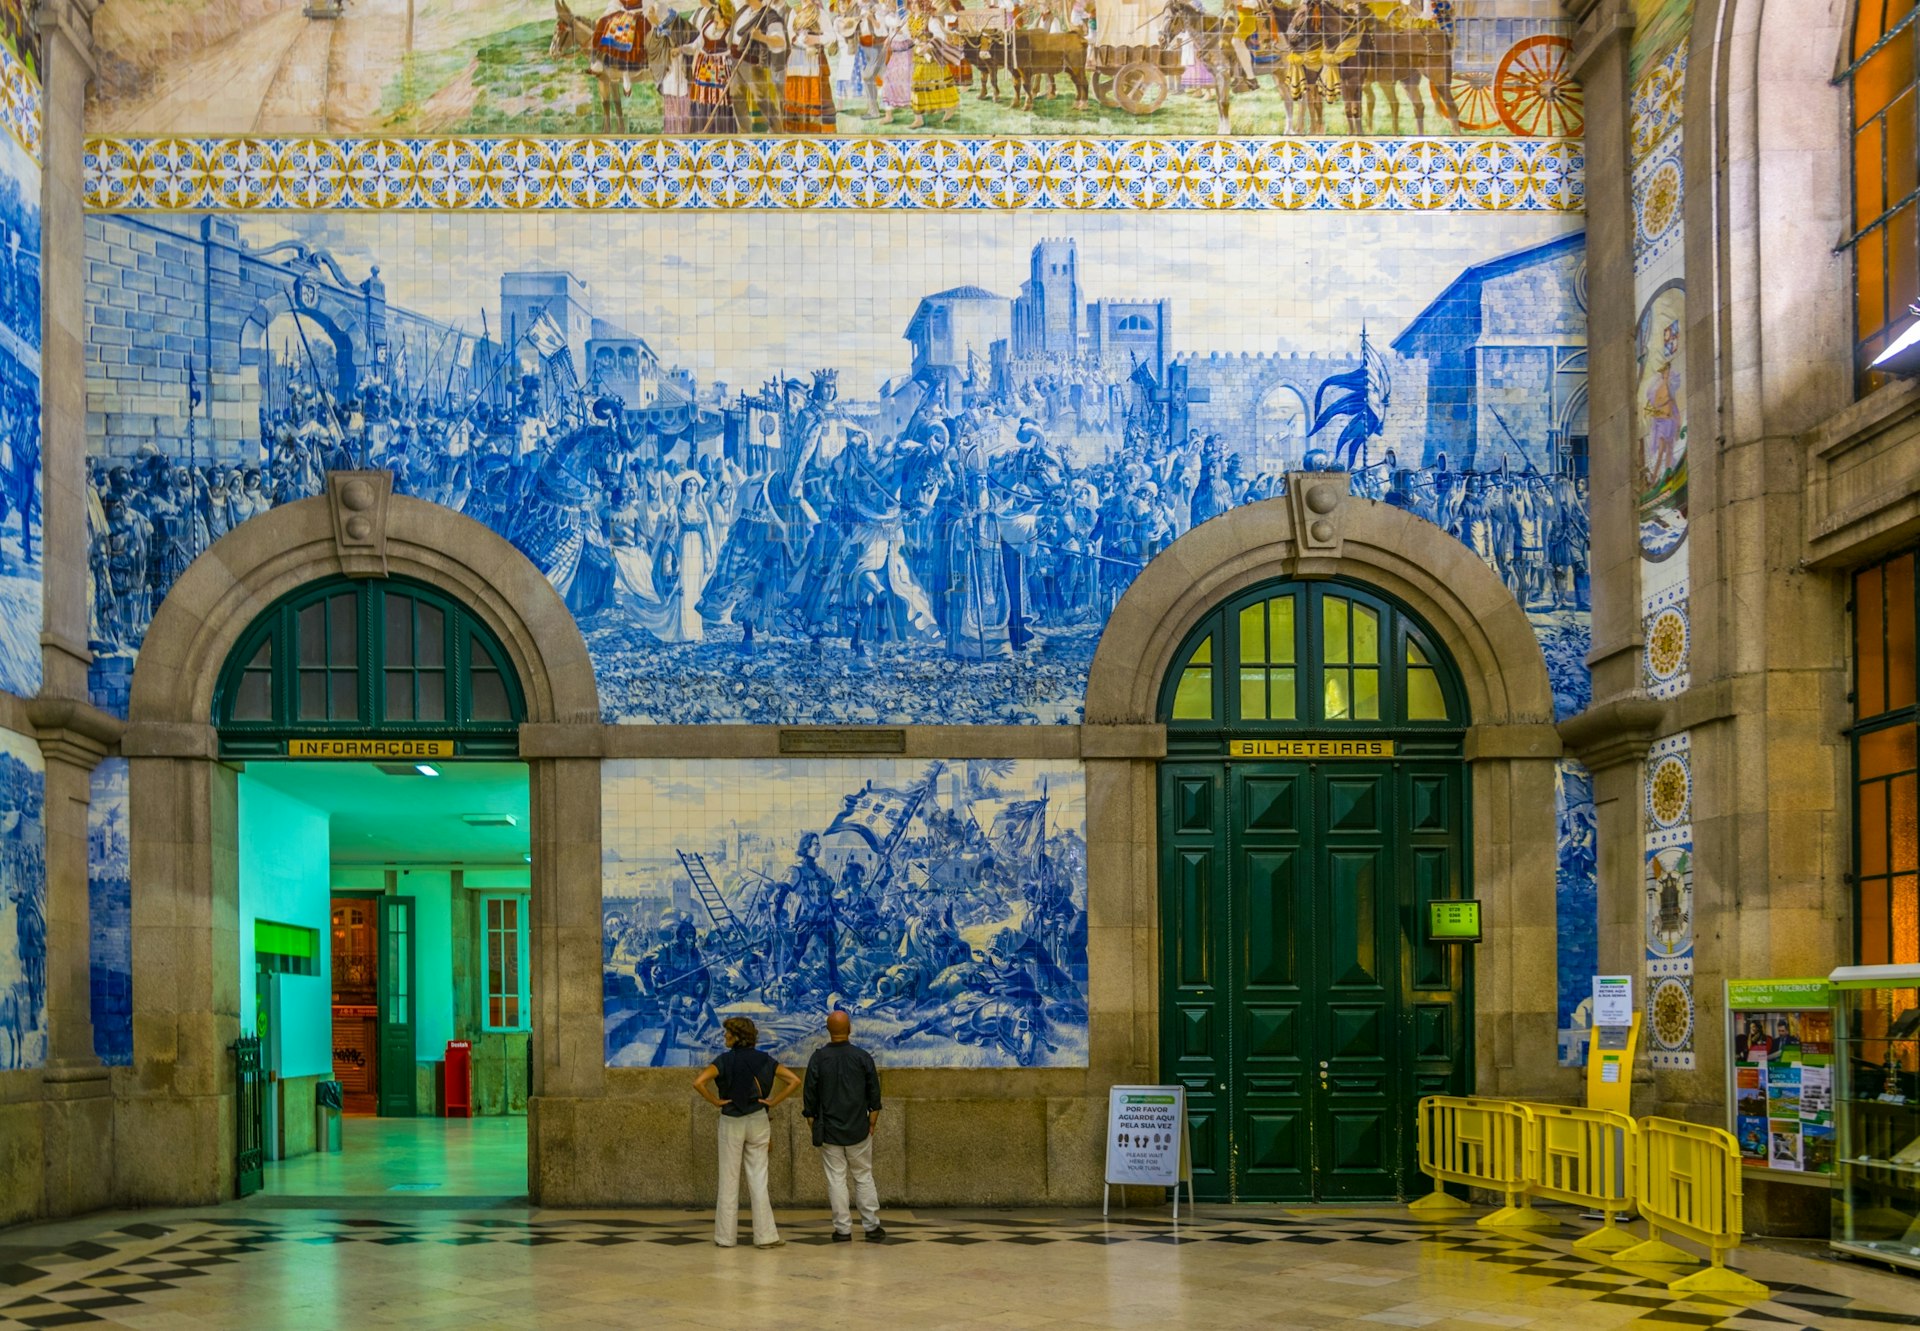 People looking up at the azulejos mosaics inside the main train station at Porto